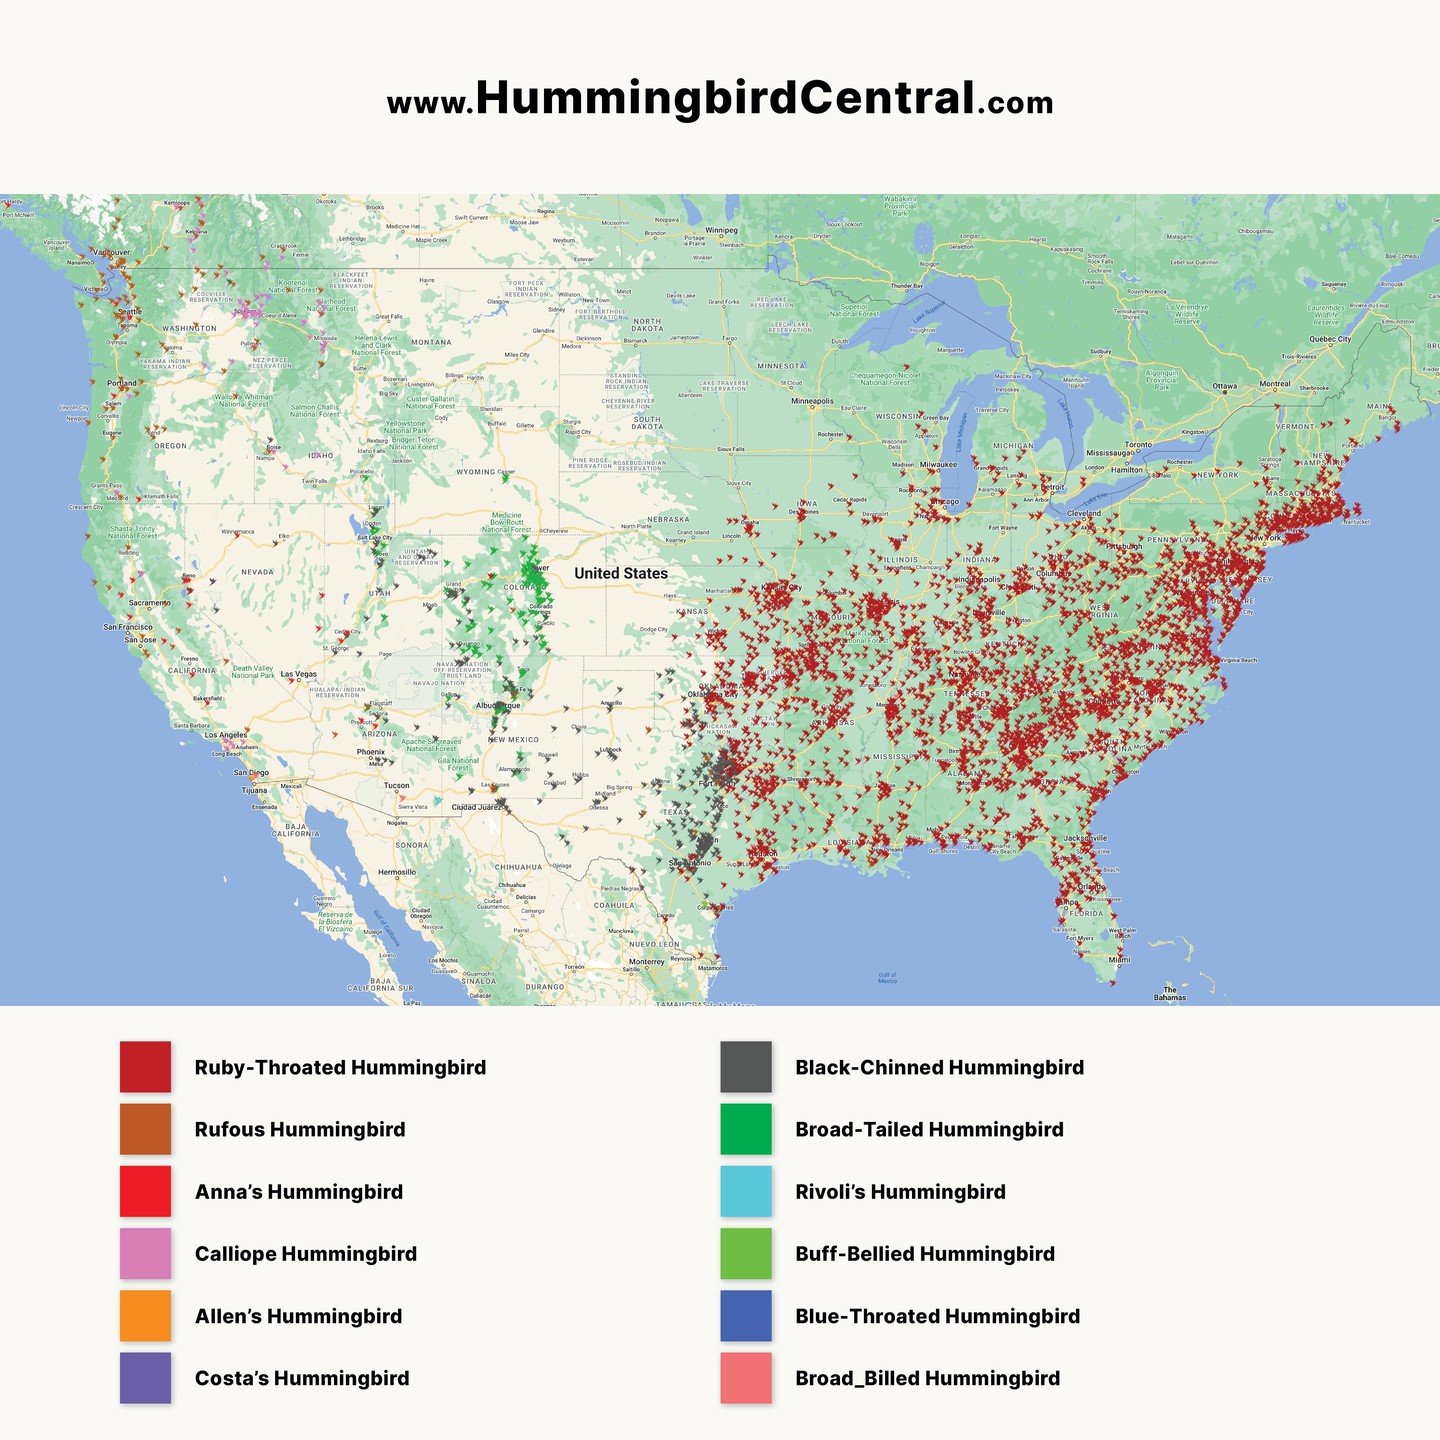 Hummingbirds have ARRIVED! Certainly for us in the Northeast and many other places throughout the US. Check out @hummingbirdcentral for their fantastic #hummingbird migration map. We look at this map daily in the spring to make sure we know when to p